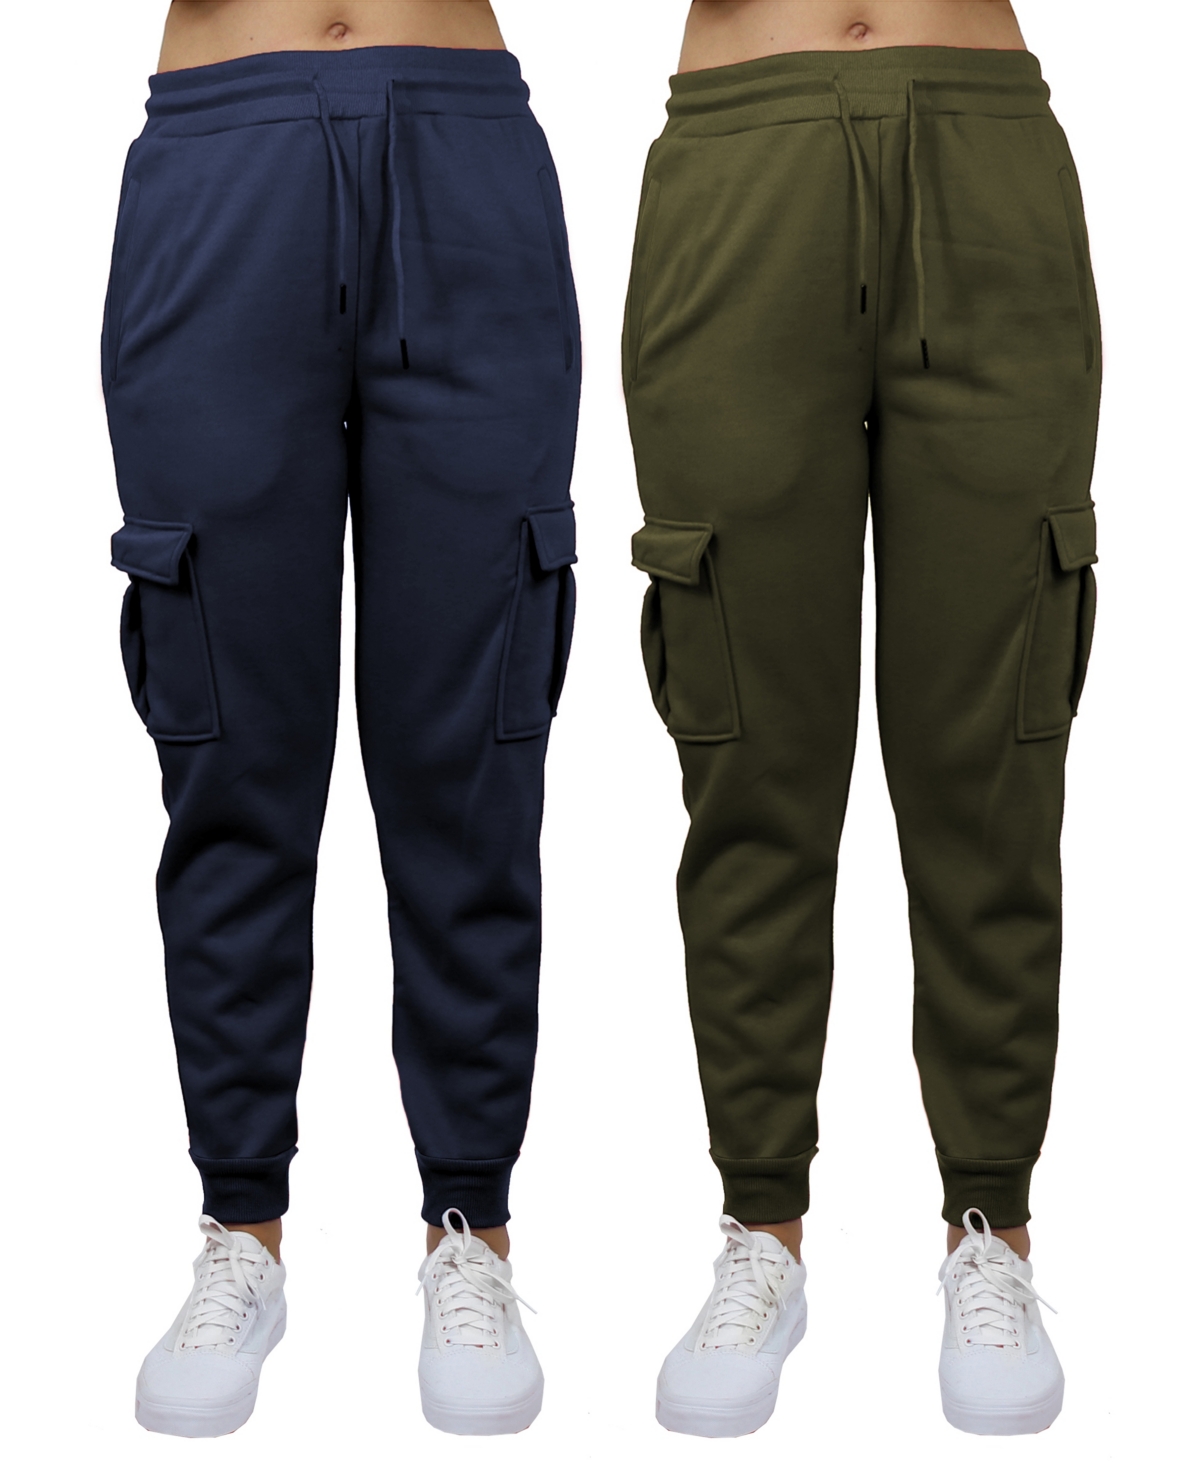 Women's Heavyweight Loose Fit Fleece Lined Cargo Jogger Pants Set, 2 Pack - Navy, Olive